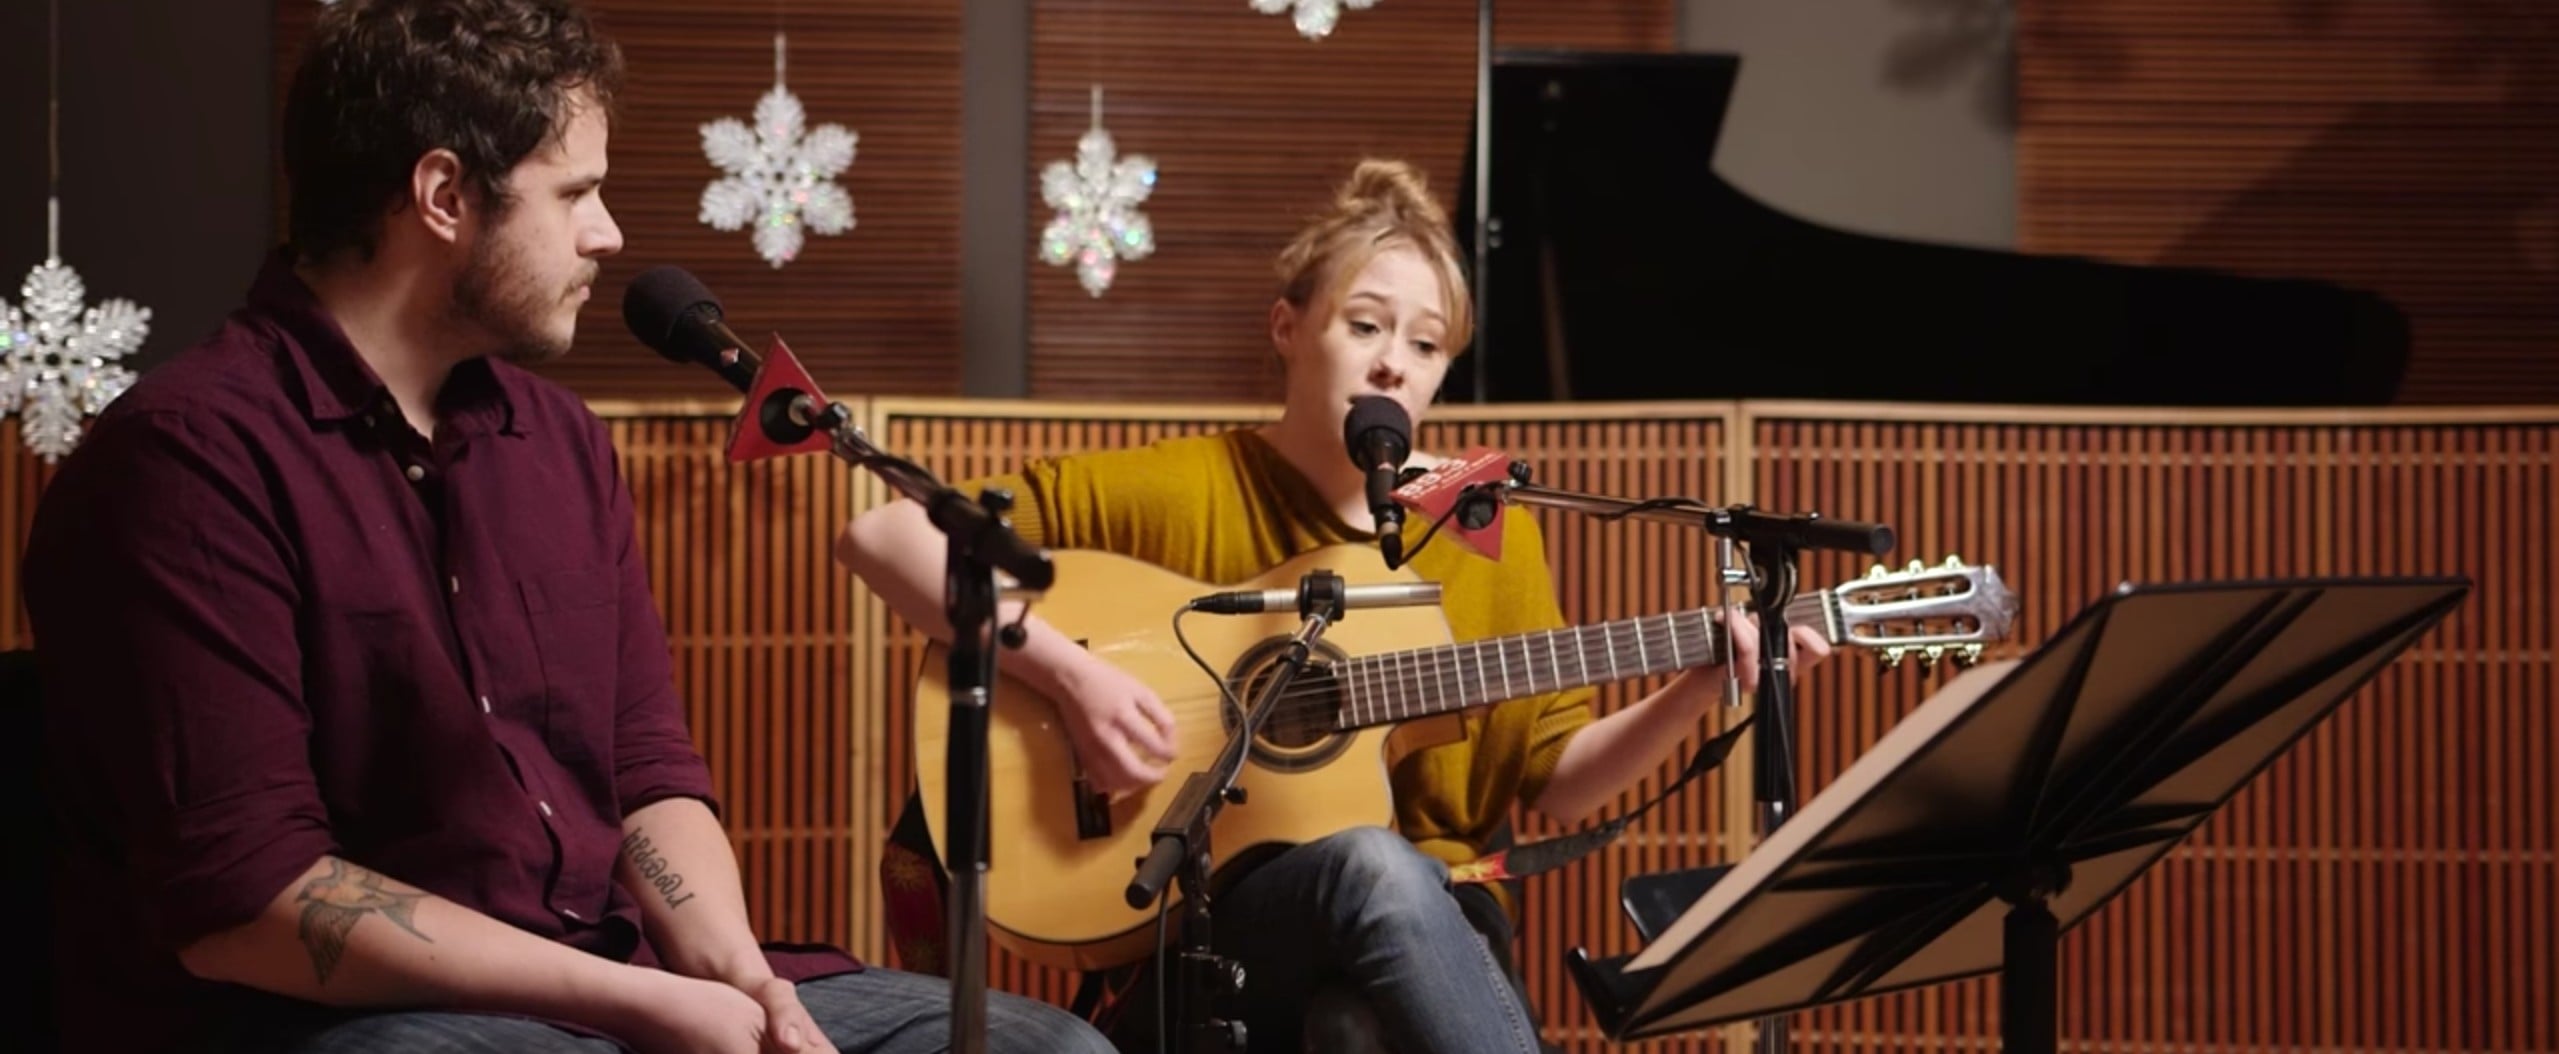 VIDEO: The feminist-friendly version of 'Baby, It's Cold Outside'